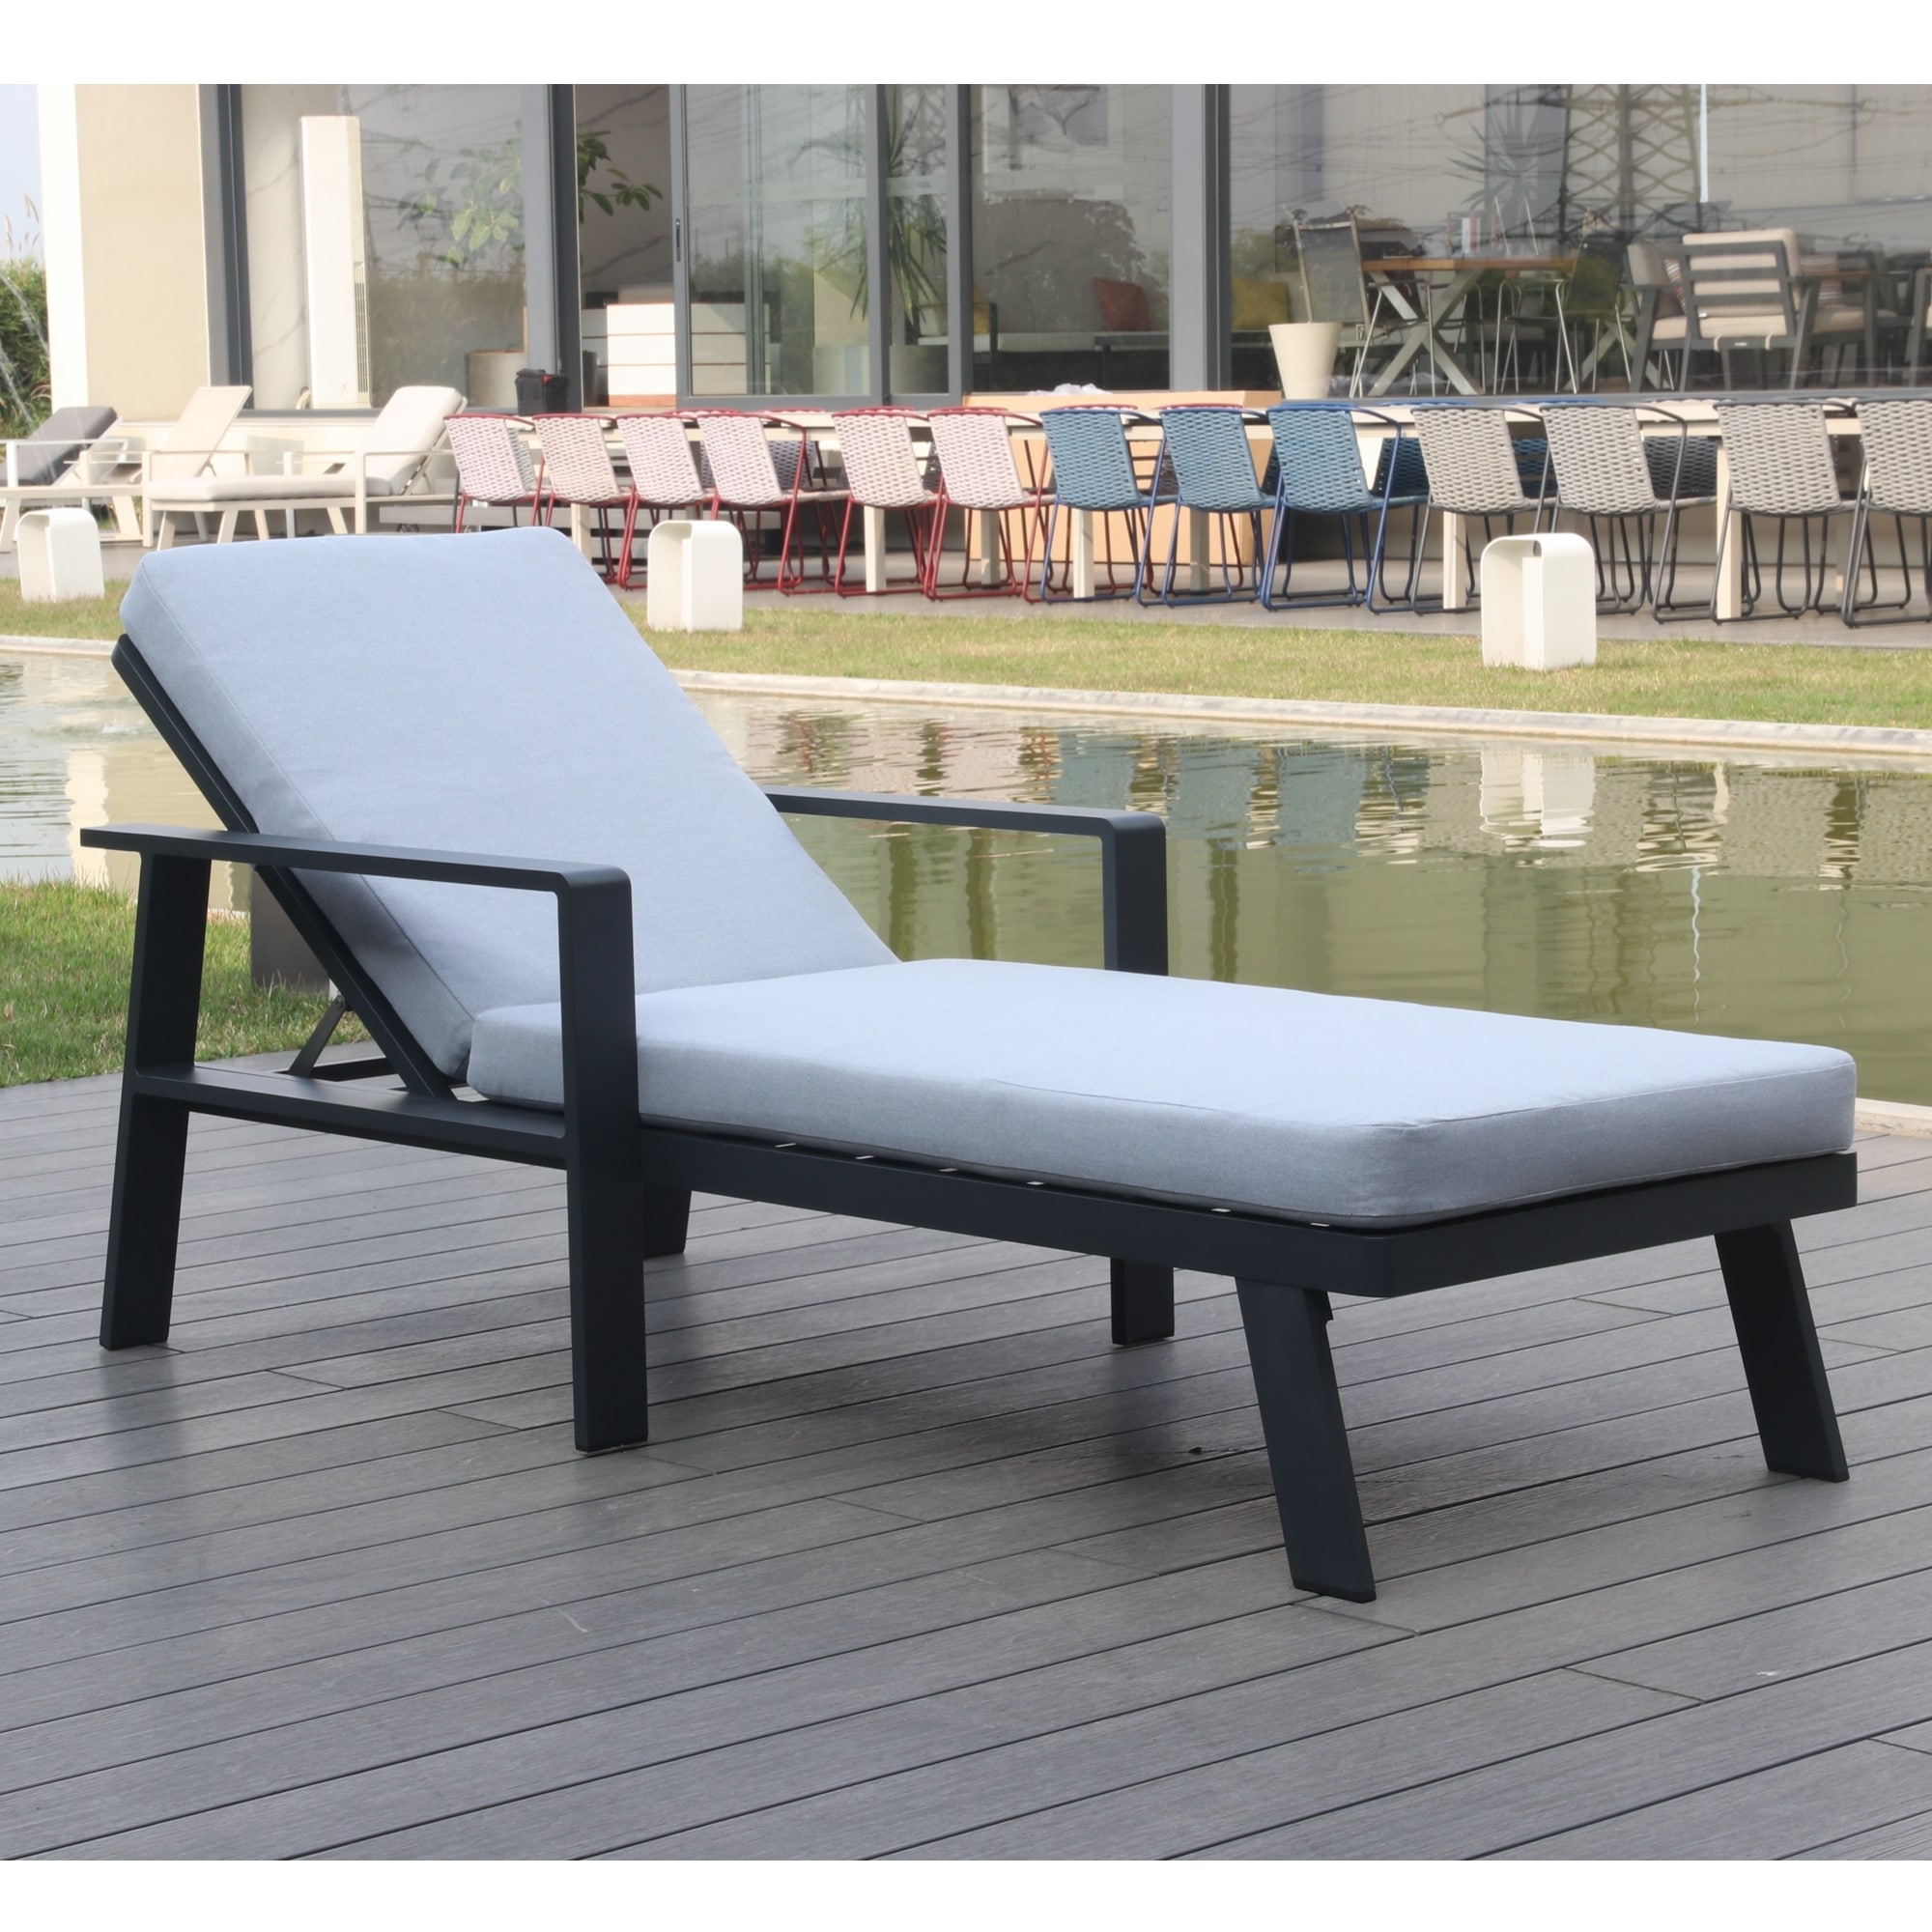 Higold - Nofi Outdoor Chaise Lounge - Patio Lounge Chair  Made Of Aluminum With Powder Coating  Grey Cushion  Matte Charcoal